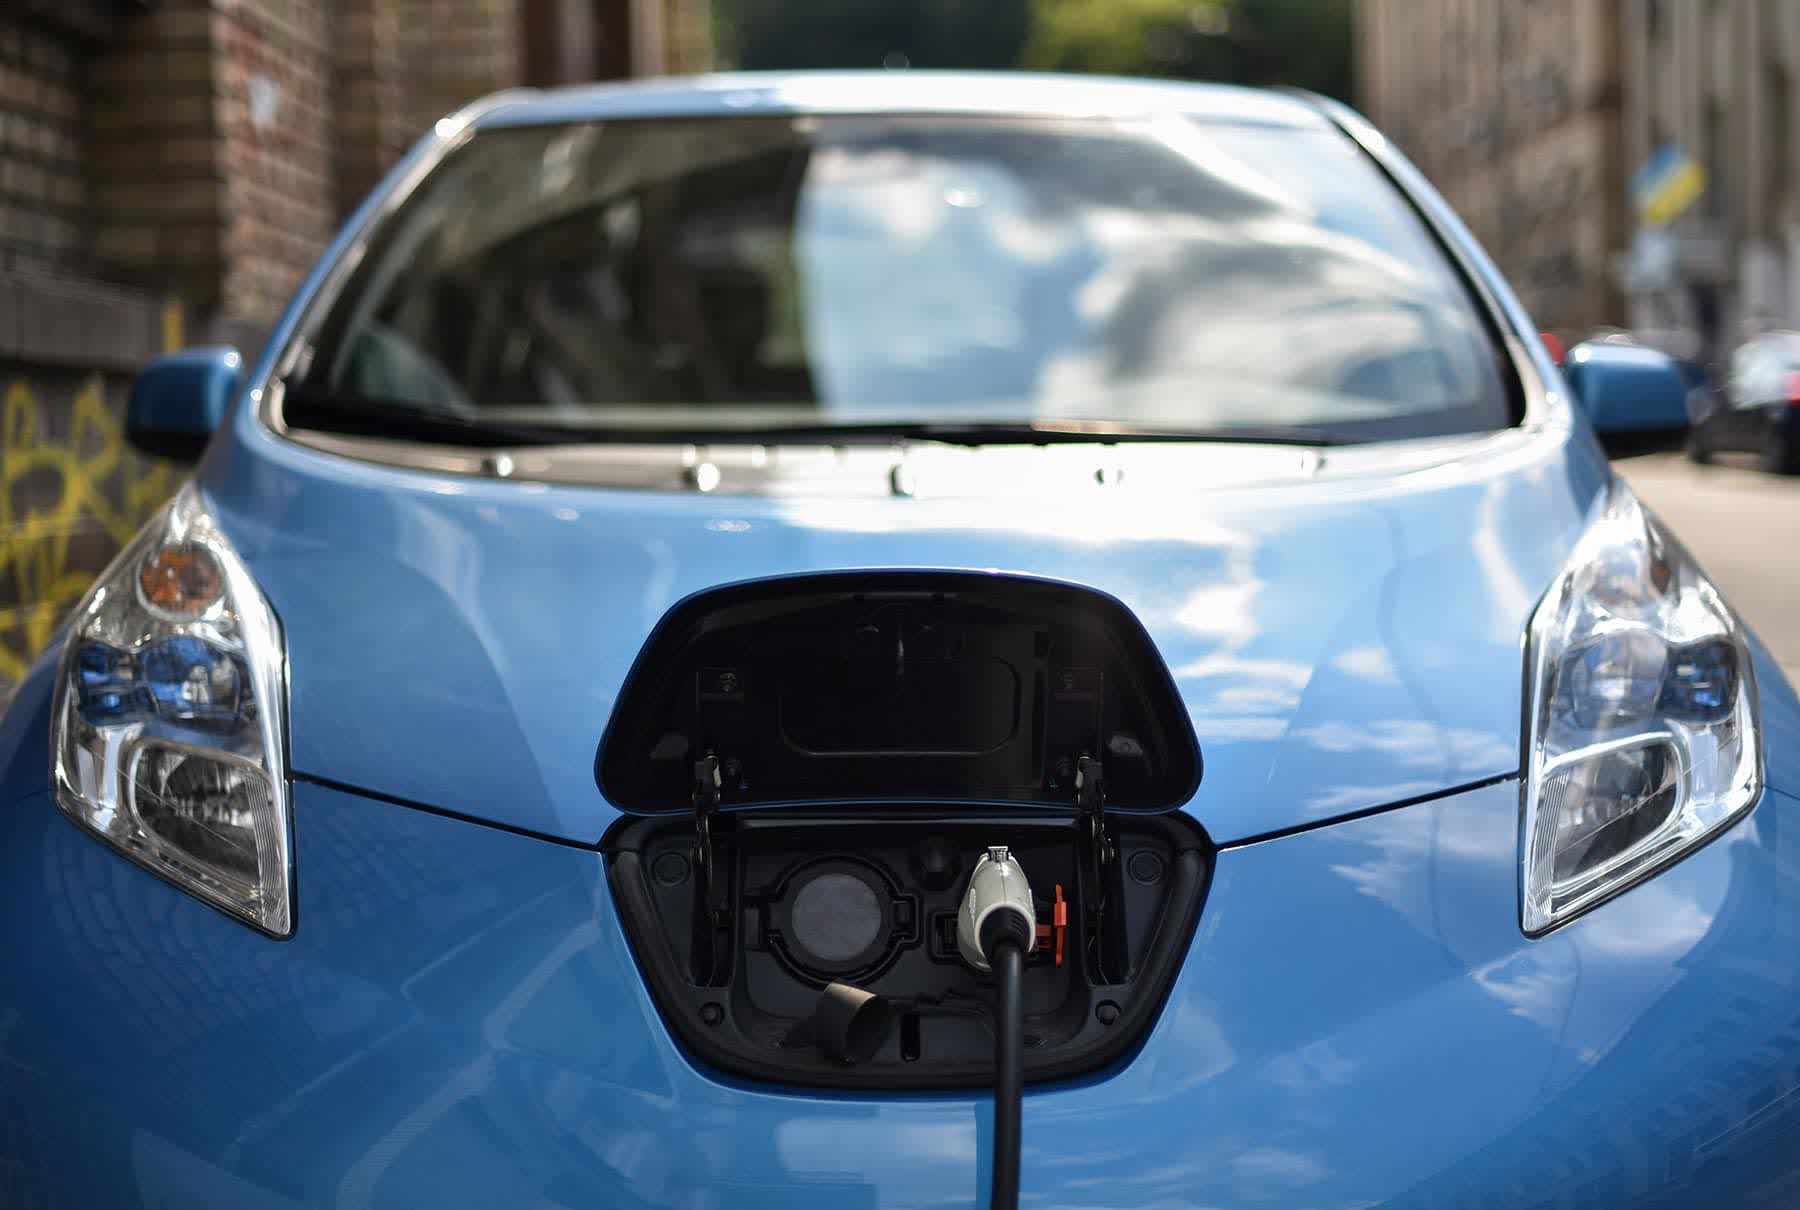 Biden administration proposes nationwide EV charging station requirements